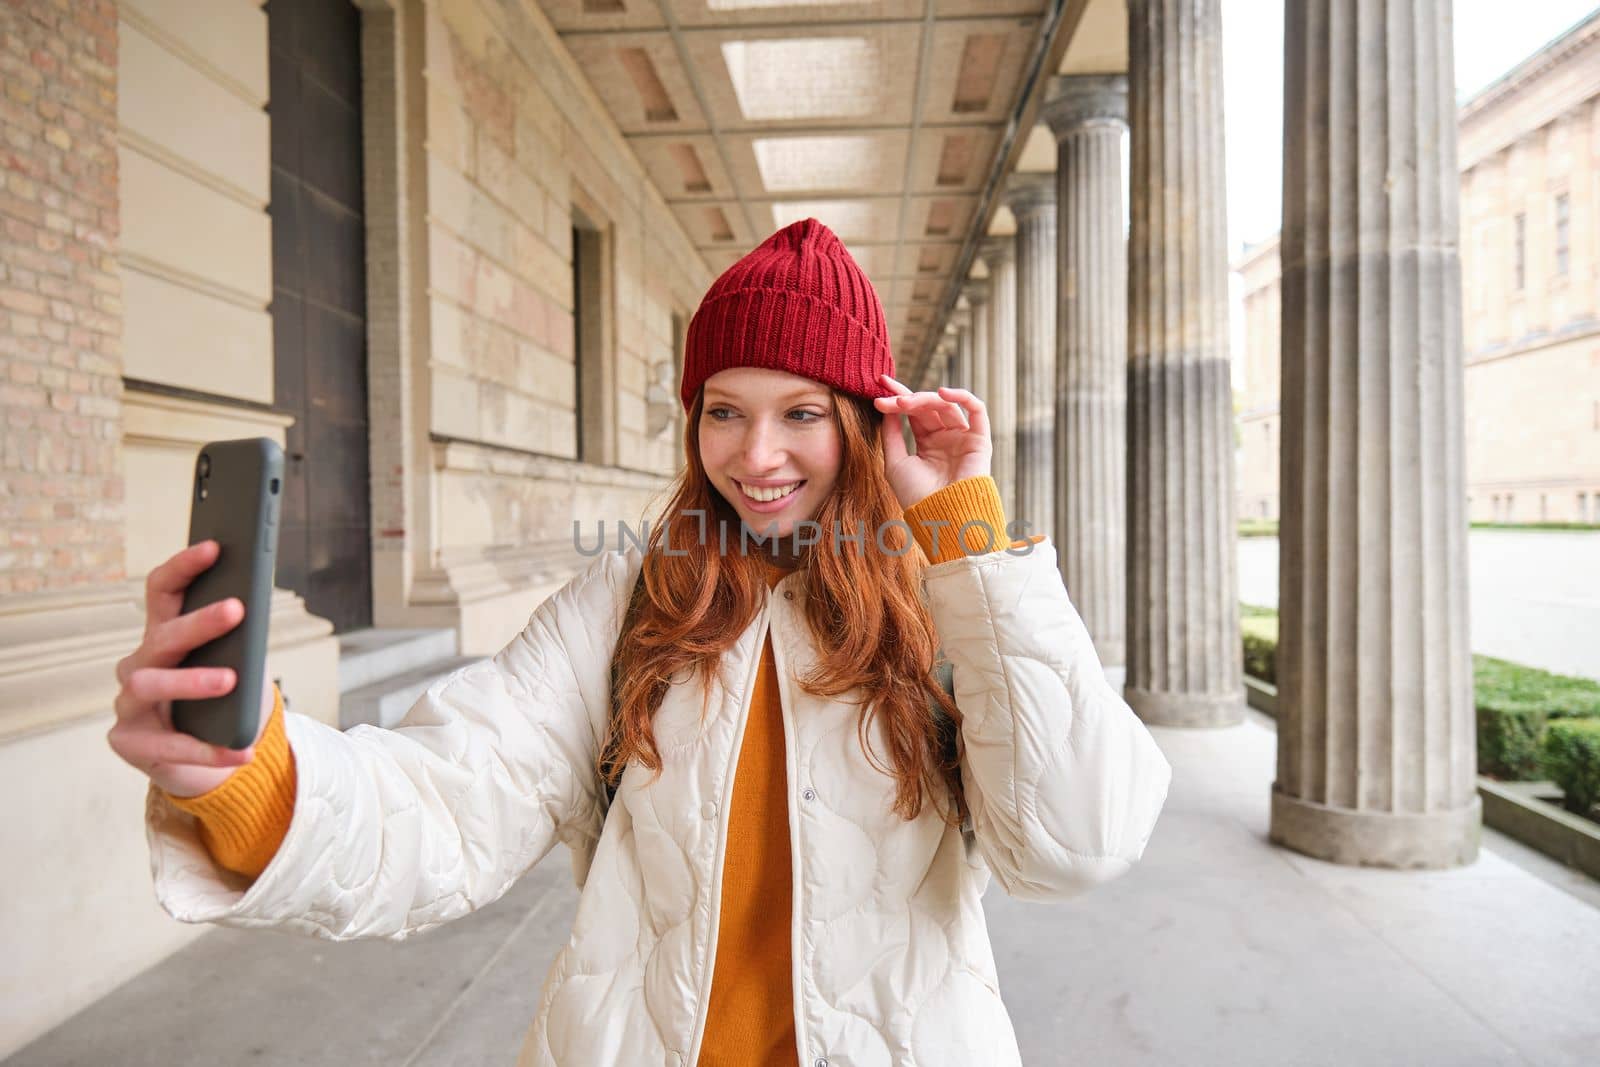 Stylish redhead girl tourist, takes selfie in front of tourism attraction, makes photo with smartphone, looks at mobile camera and poses.